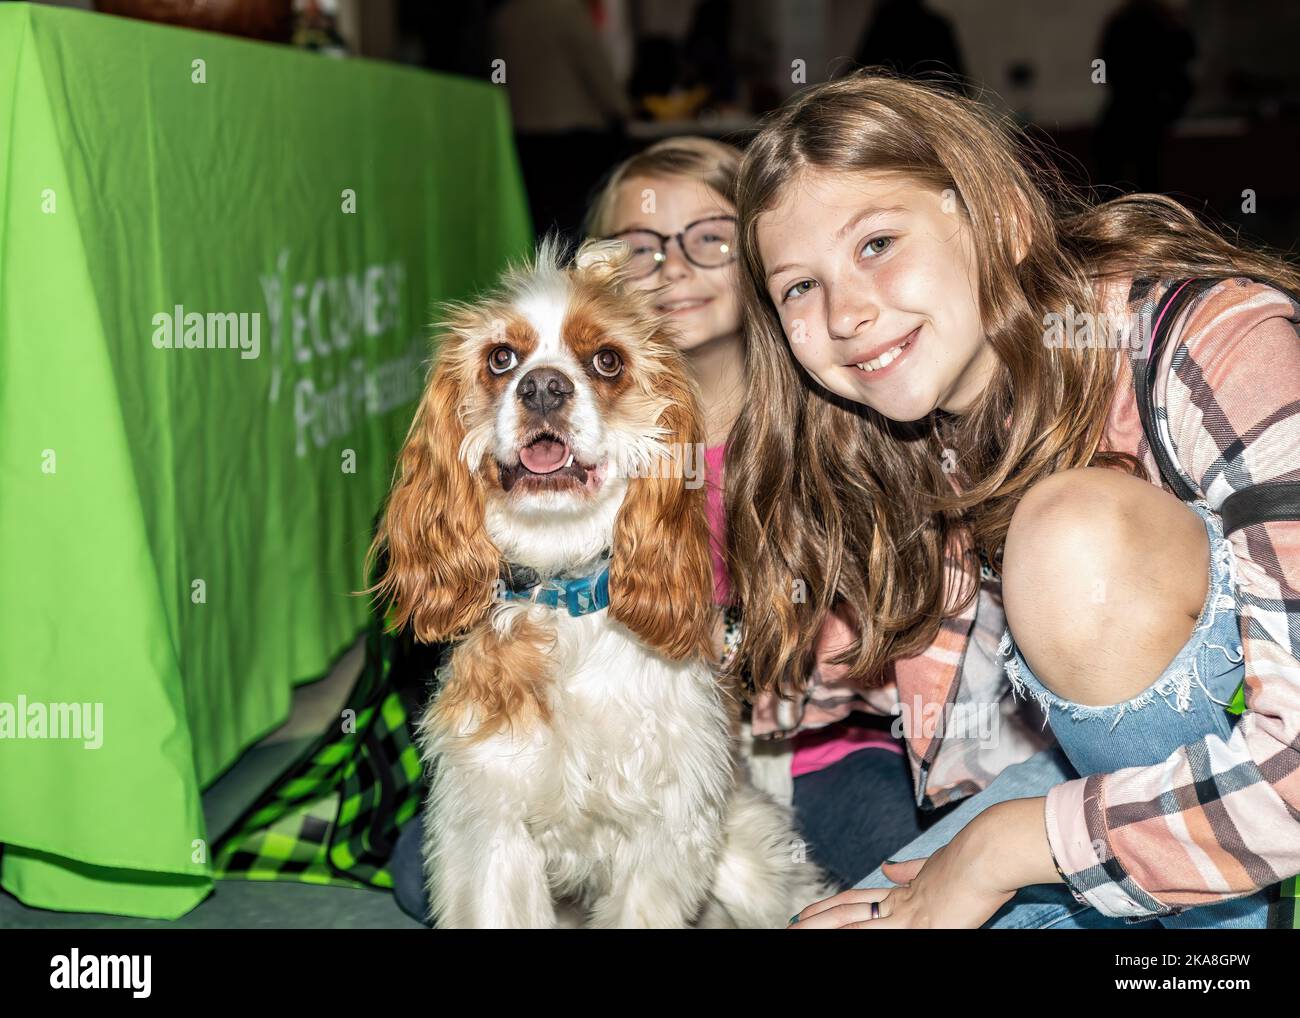 Two young girls and a service dog inside in Lindstrom, Minnesota USA. Stock Photo